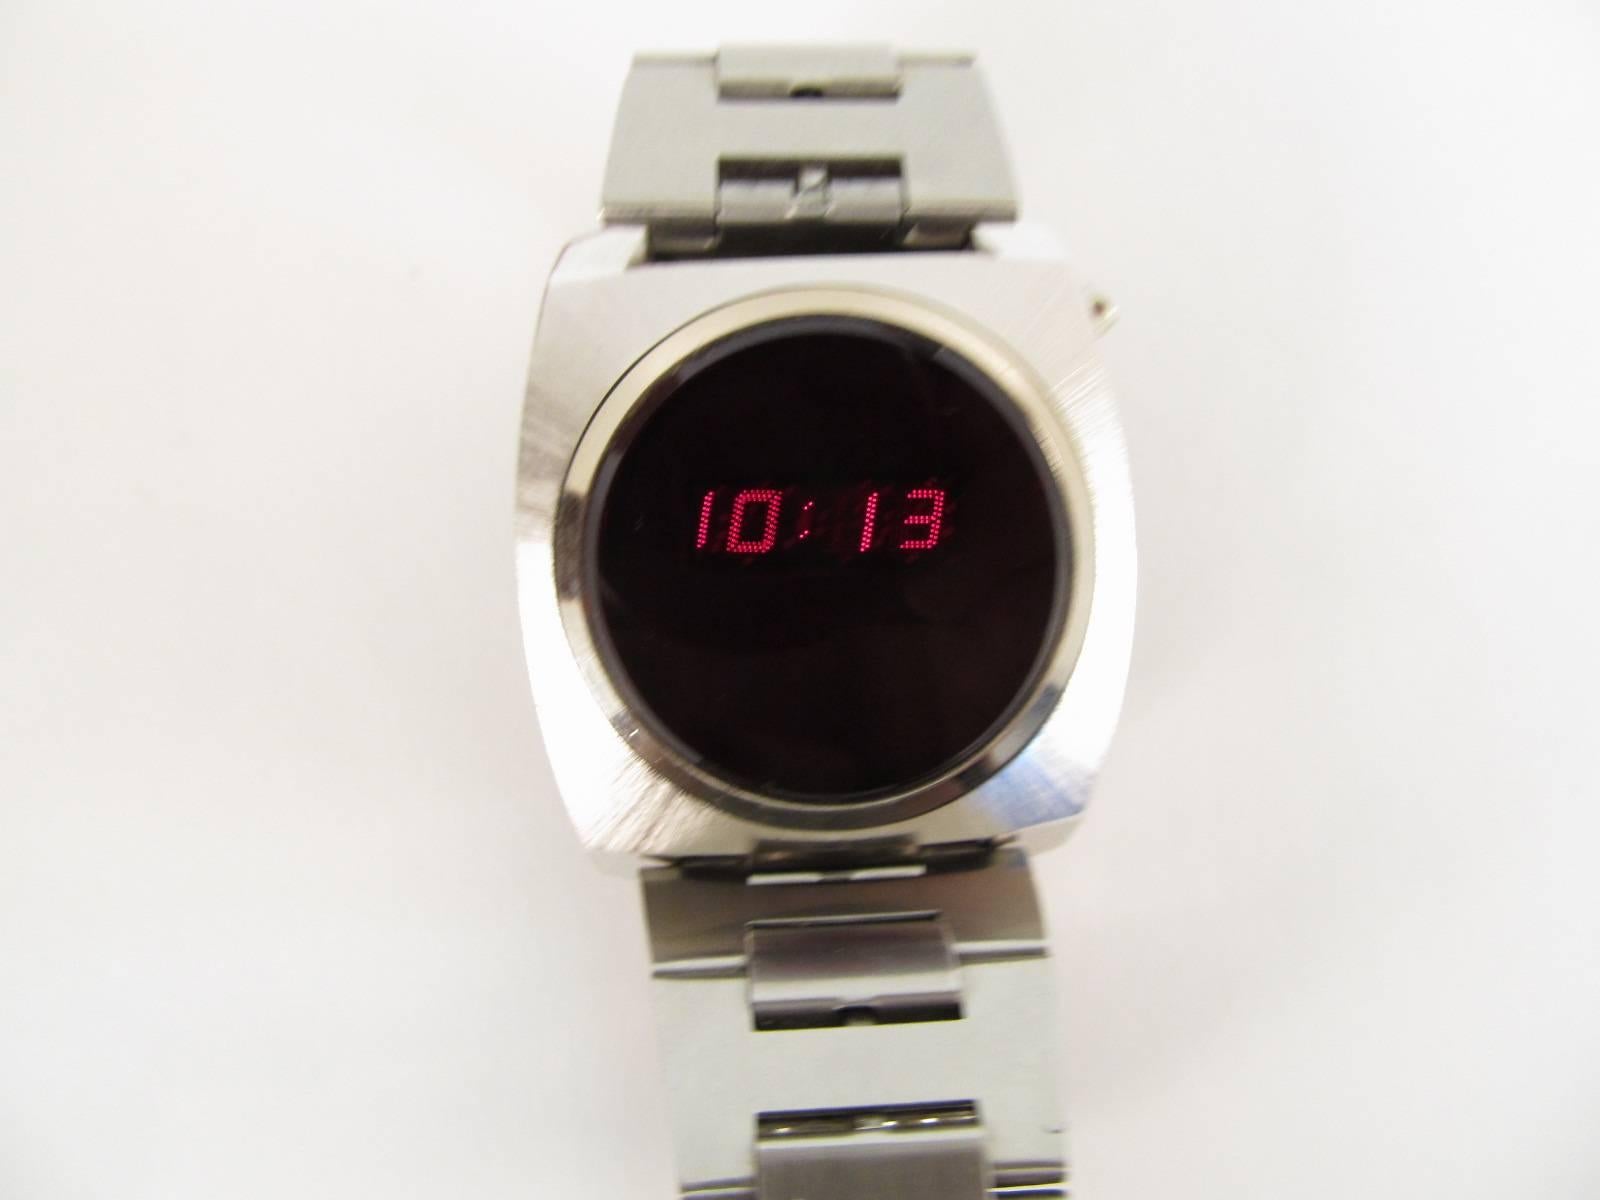 These were something of a phenomenon when they first appeared on the scene in the mid to late 1970s. Very modern! Space Age! Comes with original stainless steel adjustable band.

When you press the little button at the top right, the digital time